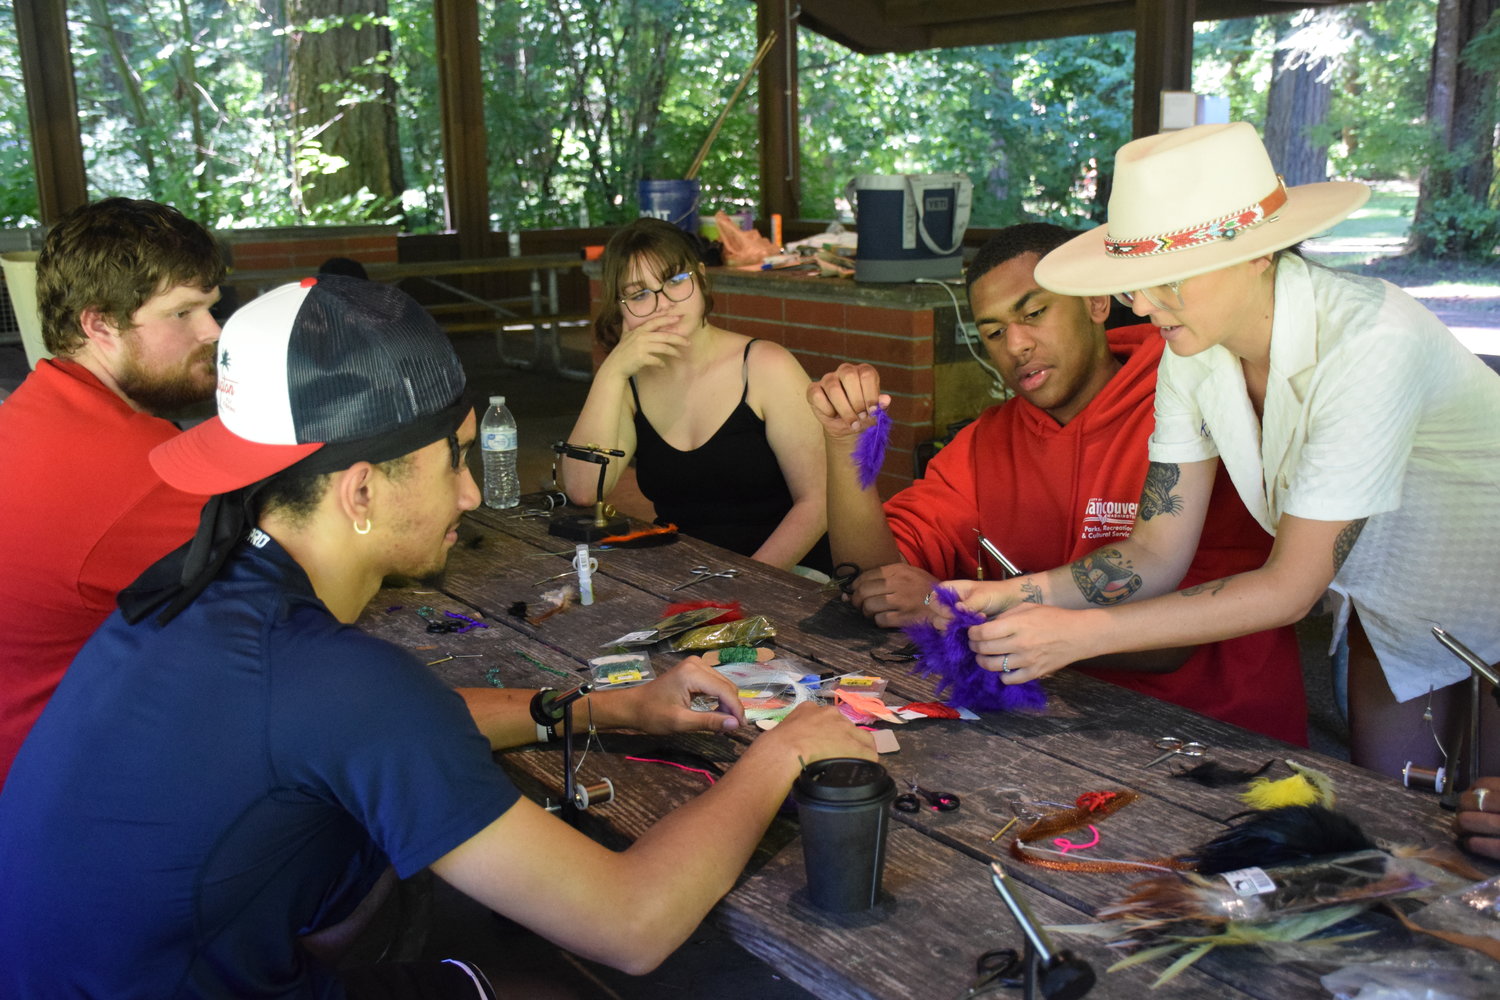 Kayla Lockhart, who is sporting a hat, teaches participants how to make a fishing fly at Battle Ground Lake State Park on July 20.